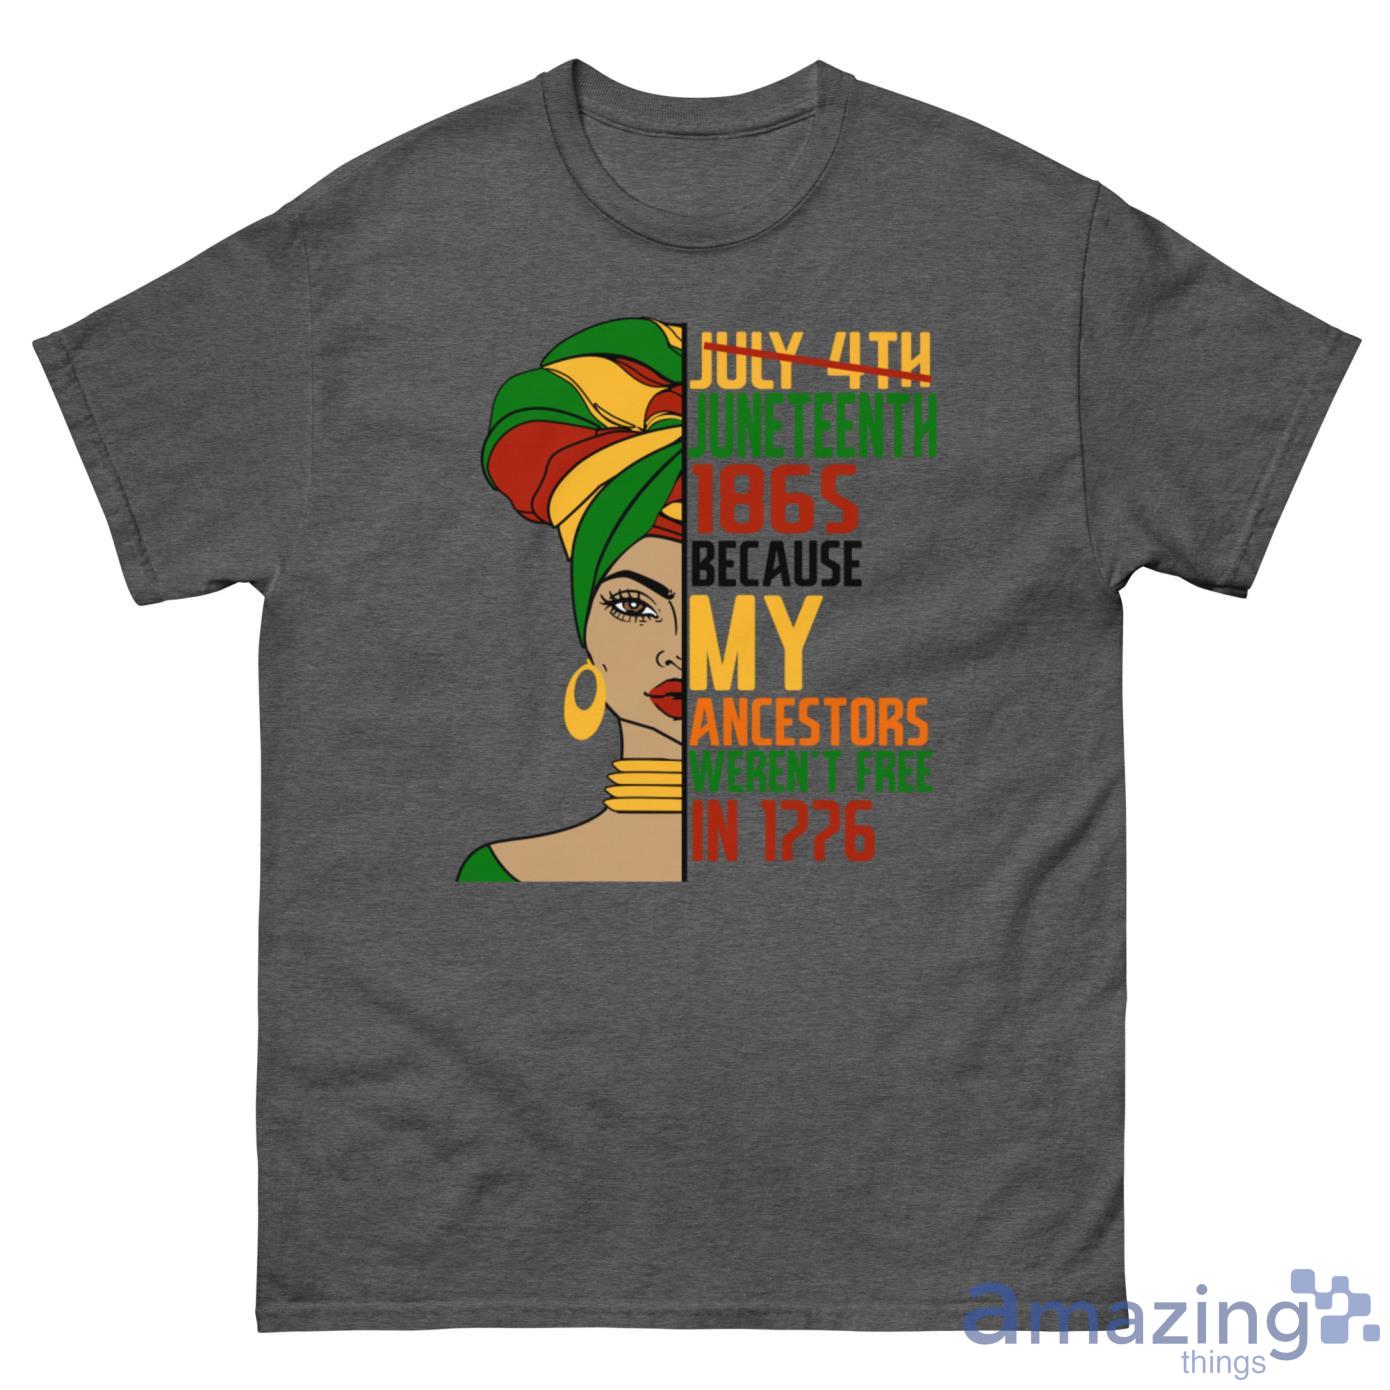 July 4th Juneteenth 1865 Because My Ancestors Werent Free In 1776 Shirt - G500 Men’s Classic Tee-1